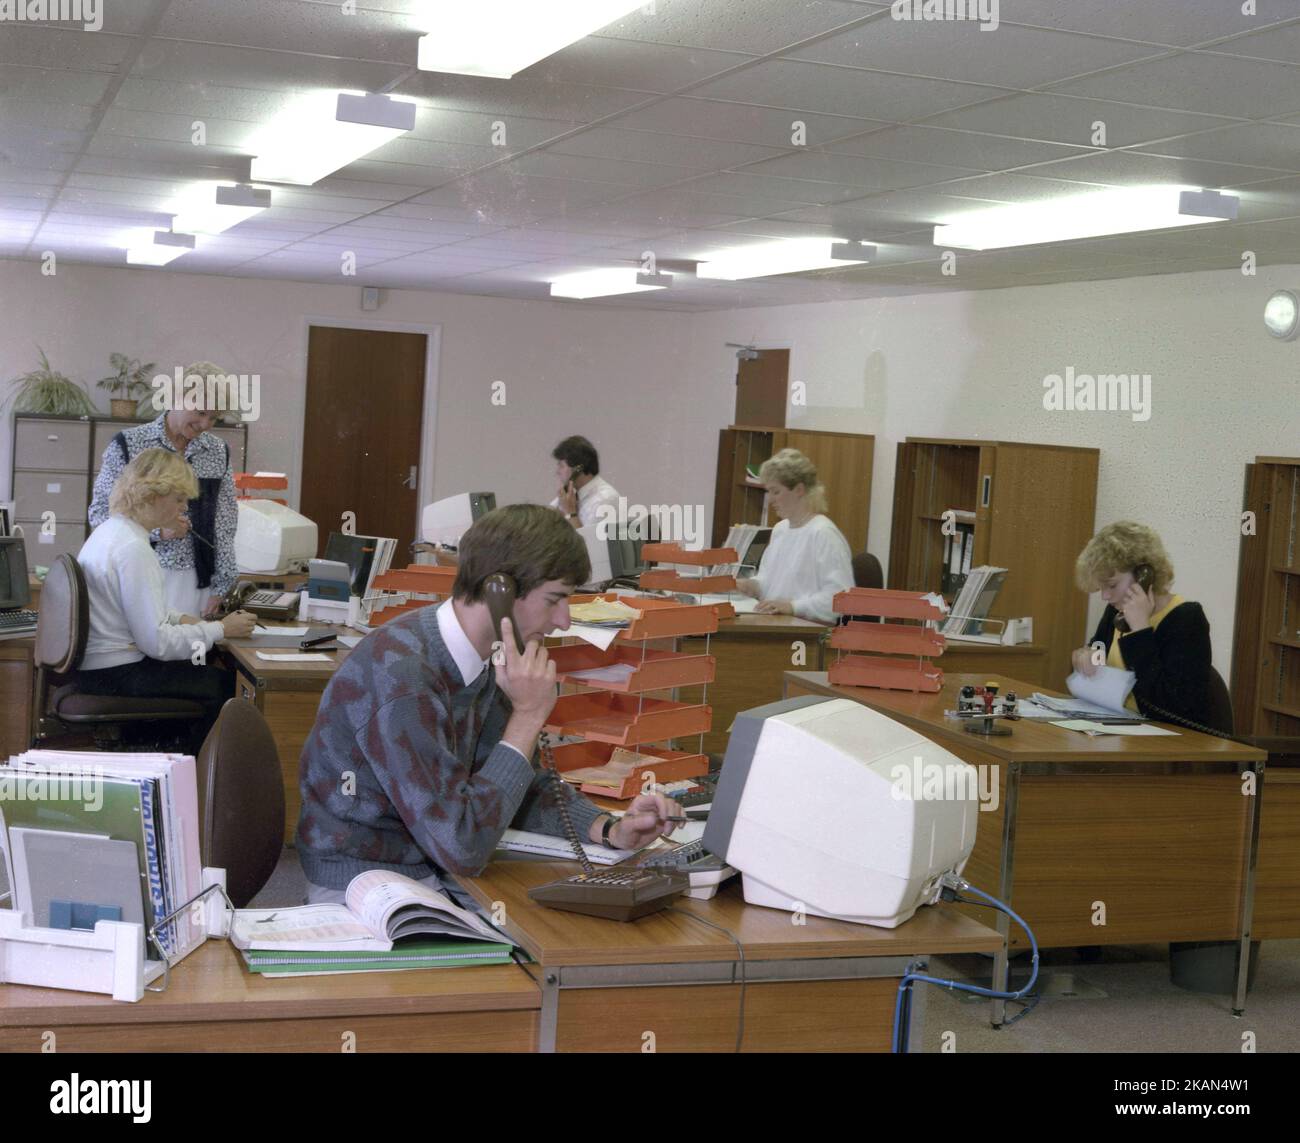 1989, historical, open plan office, male & female employees working at desks, some on the telephone, England, UK using computer consoles or PCs of the era. It was in the early 80s, when IBM launched its PC, that the small desktop personal computer market really began. Stock Photo